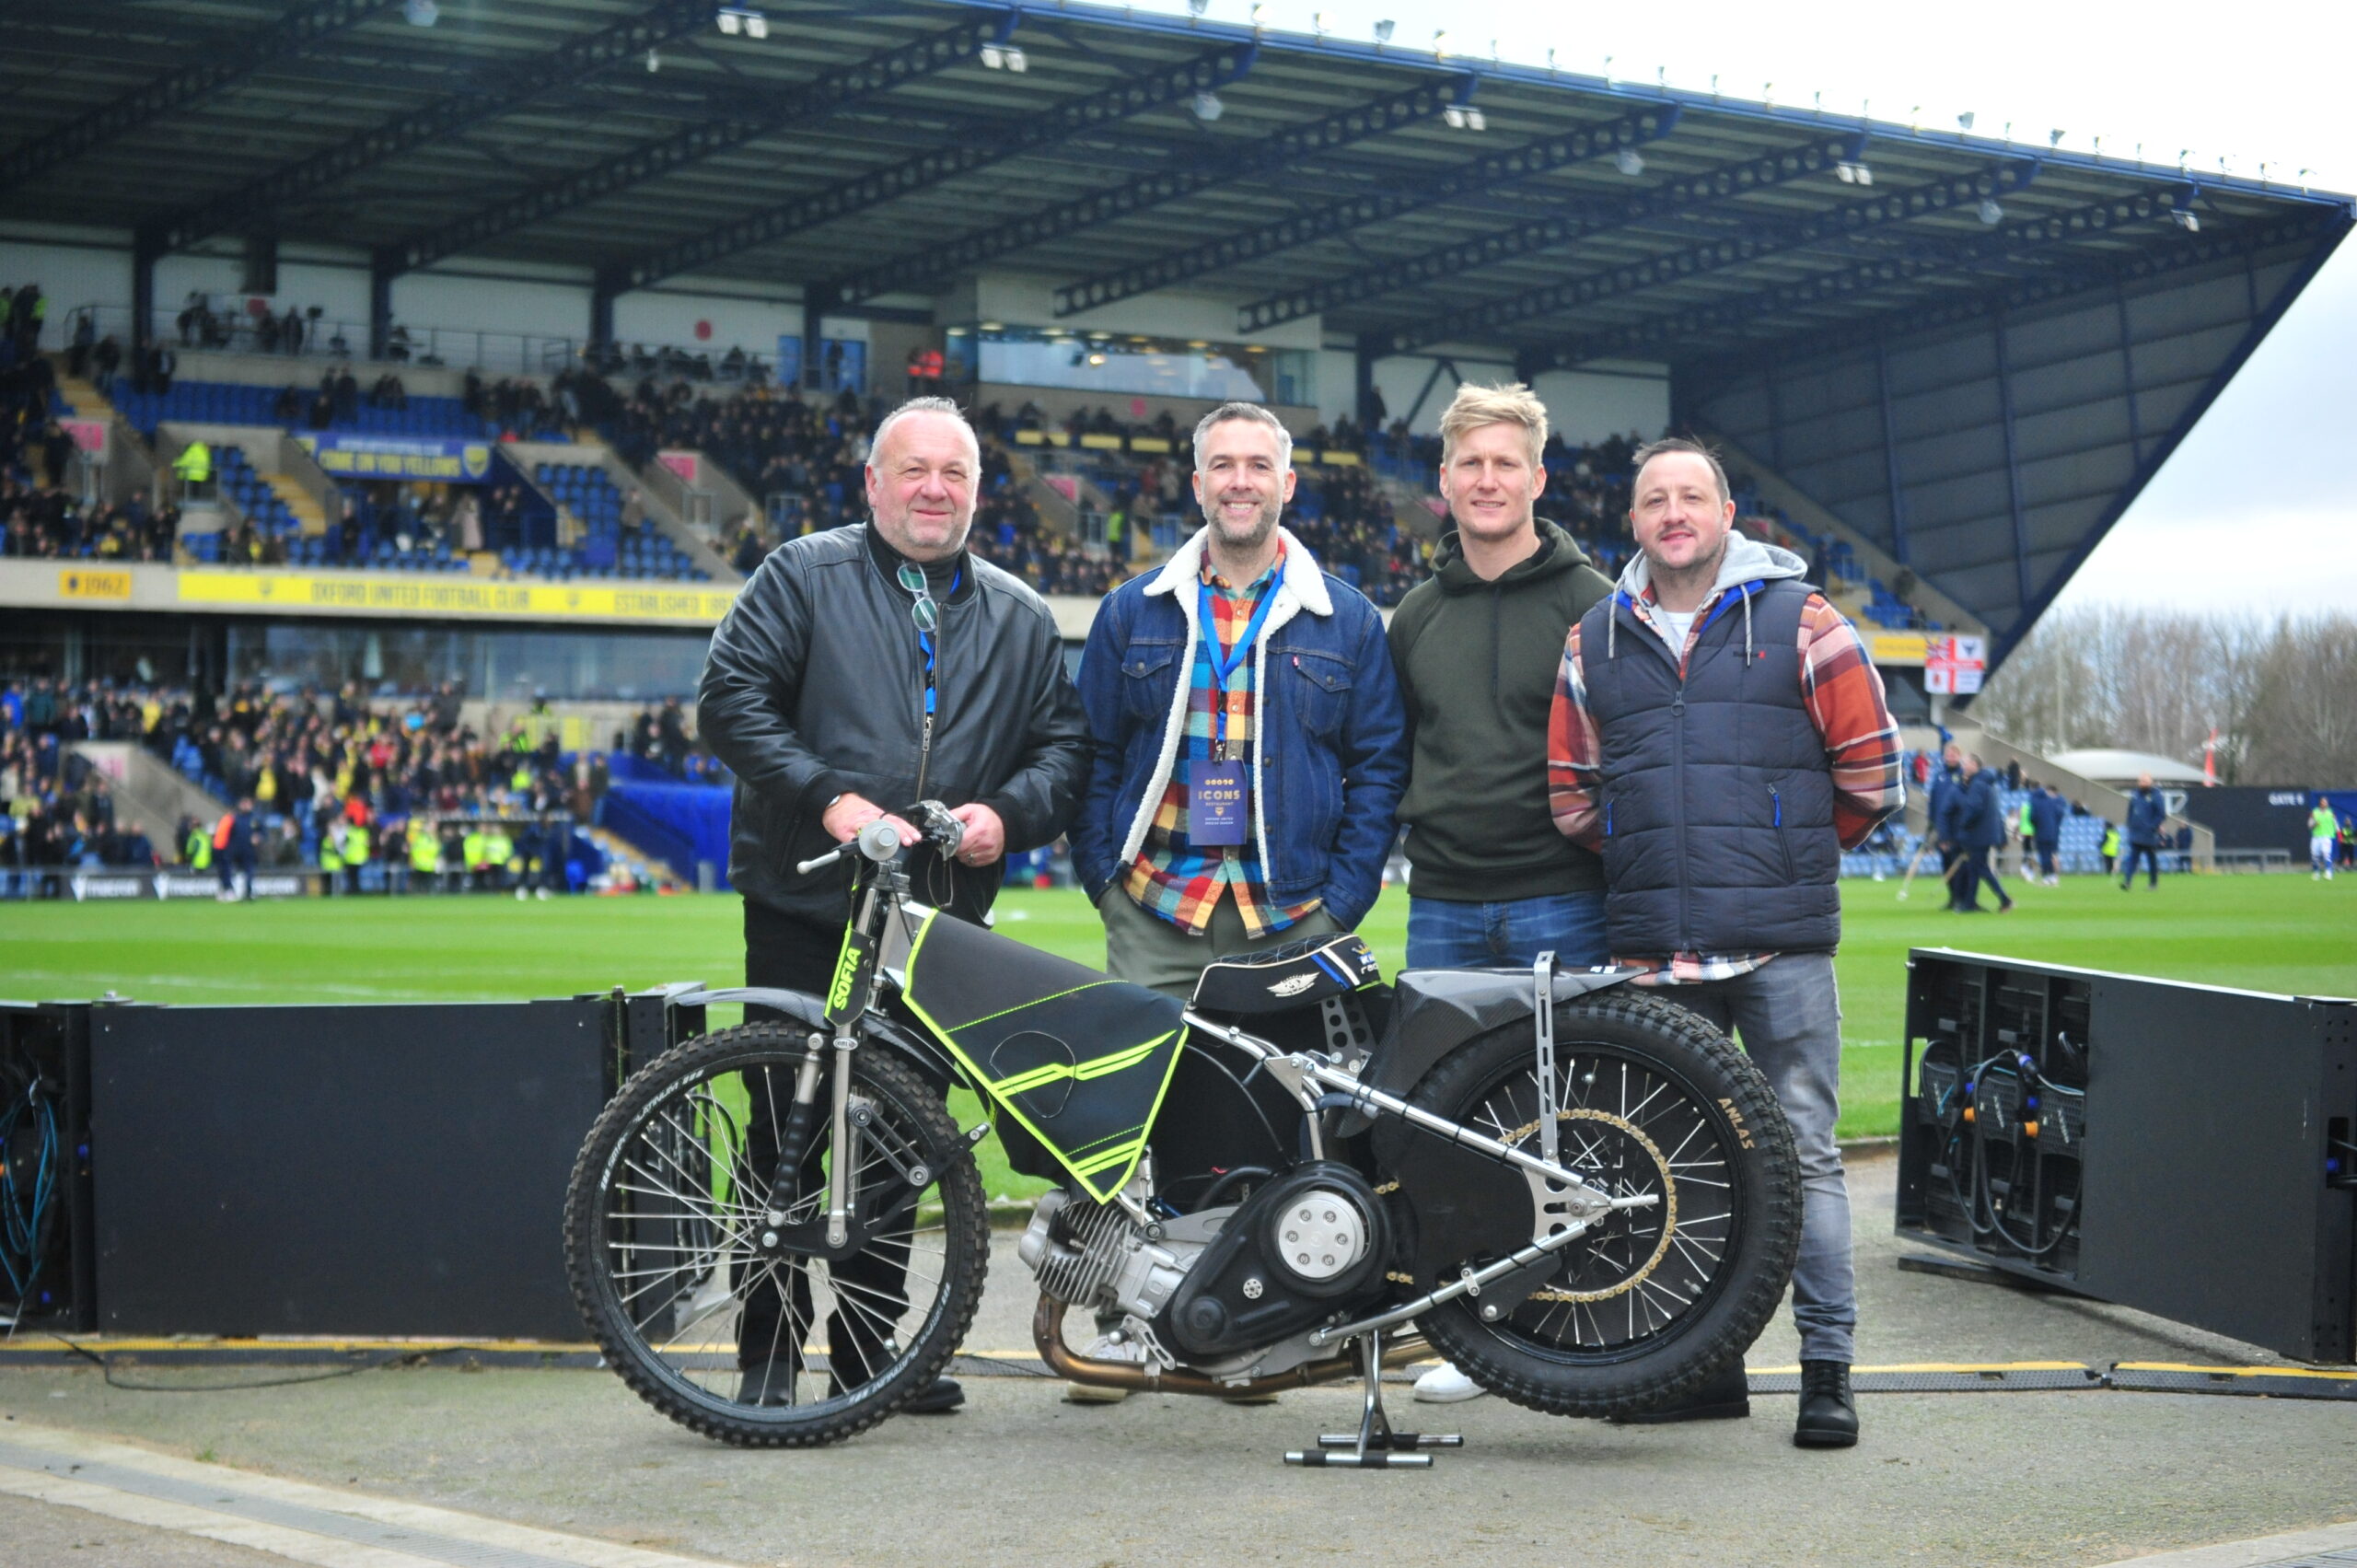 Speedway’s guest appearance at Oxford United goes down a treat!